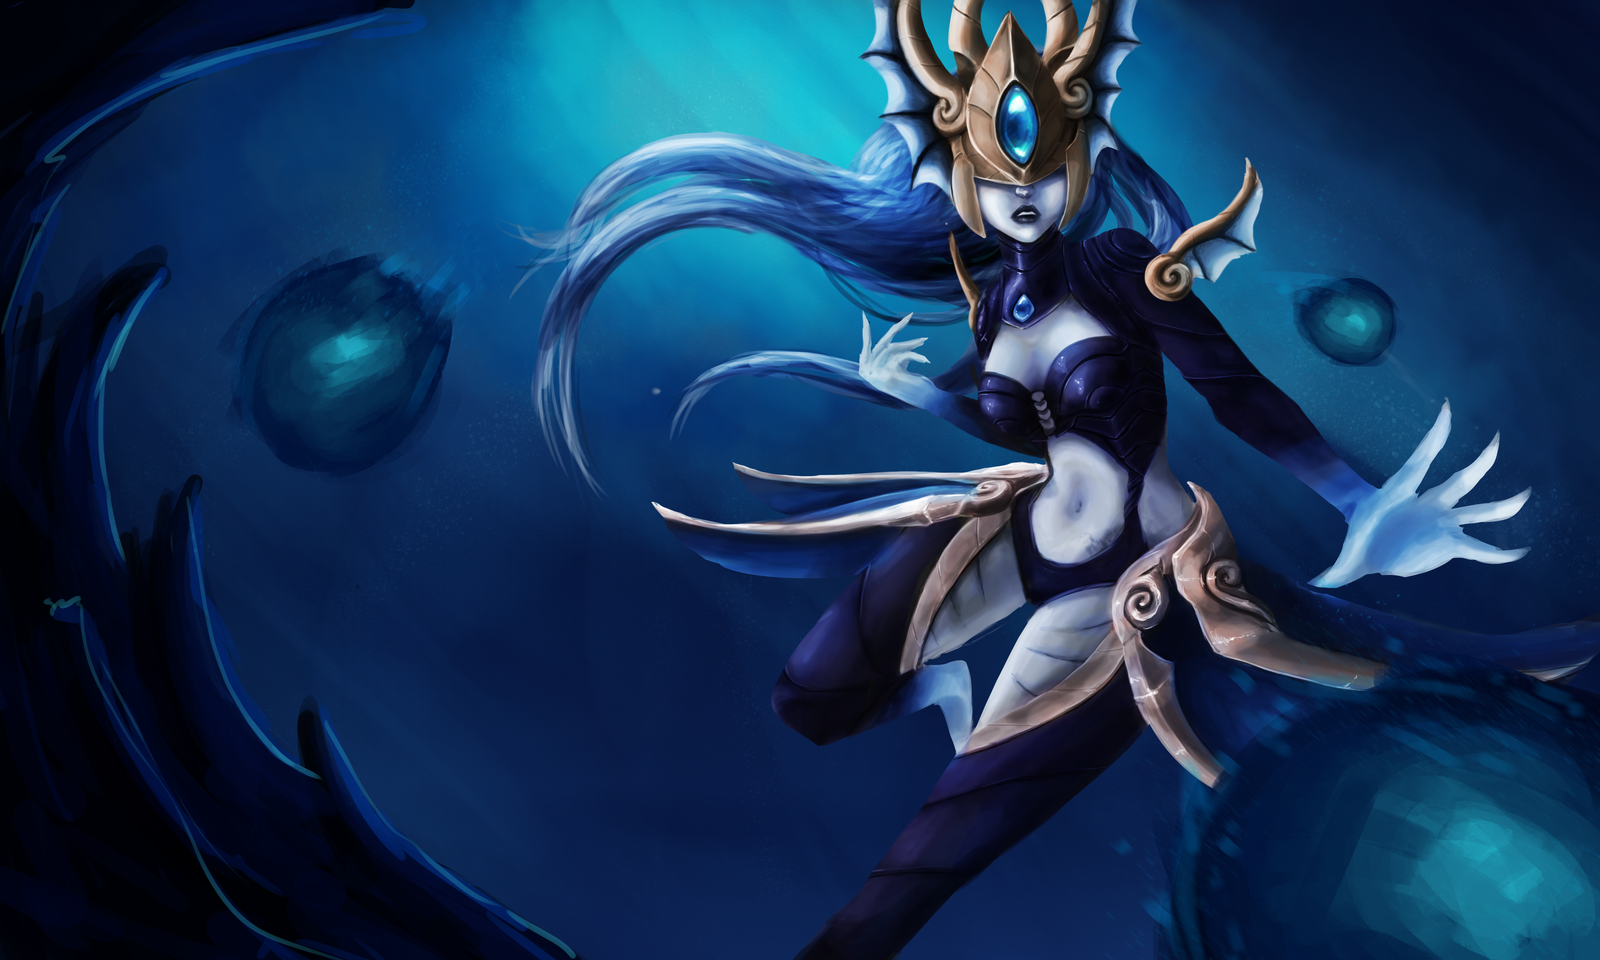 more_syndra_wip_by_miraivikki-d88k8m7.png